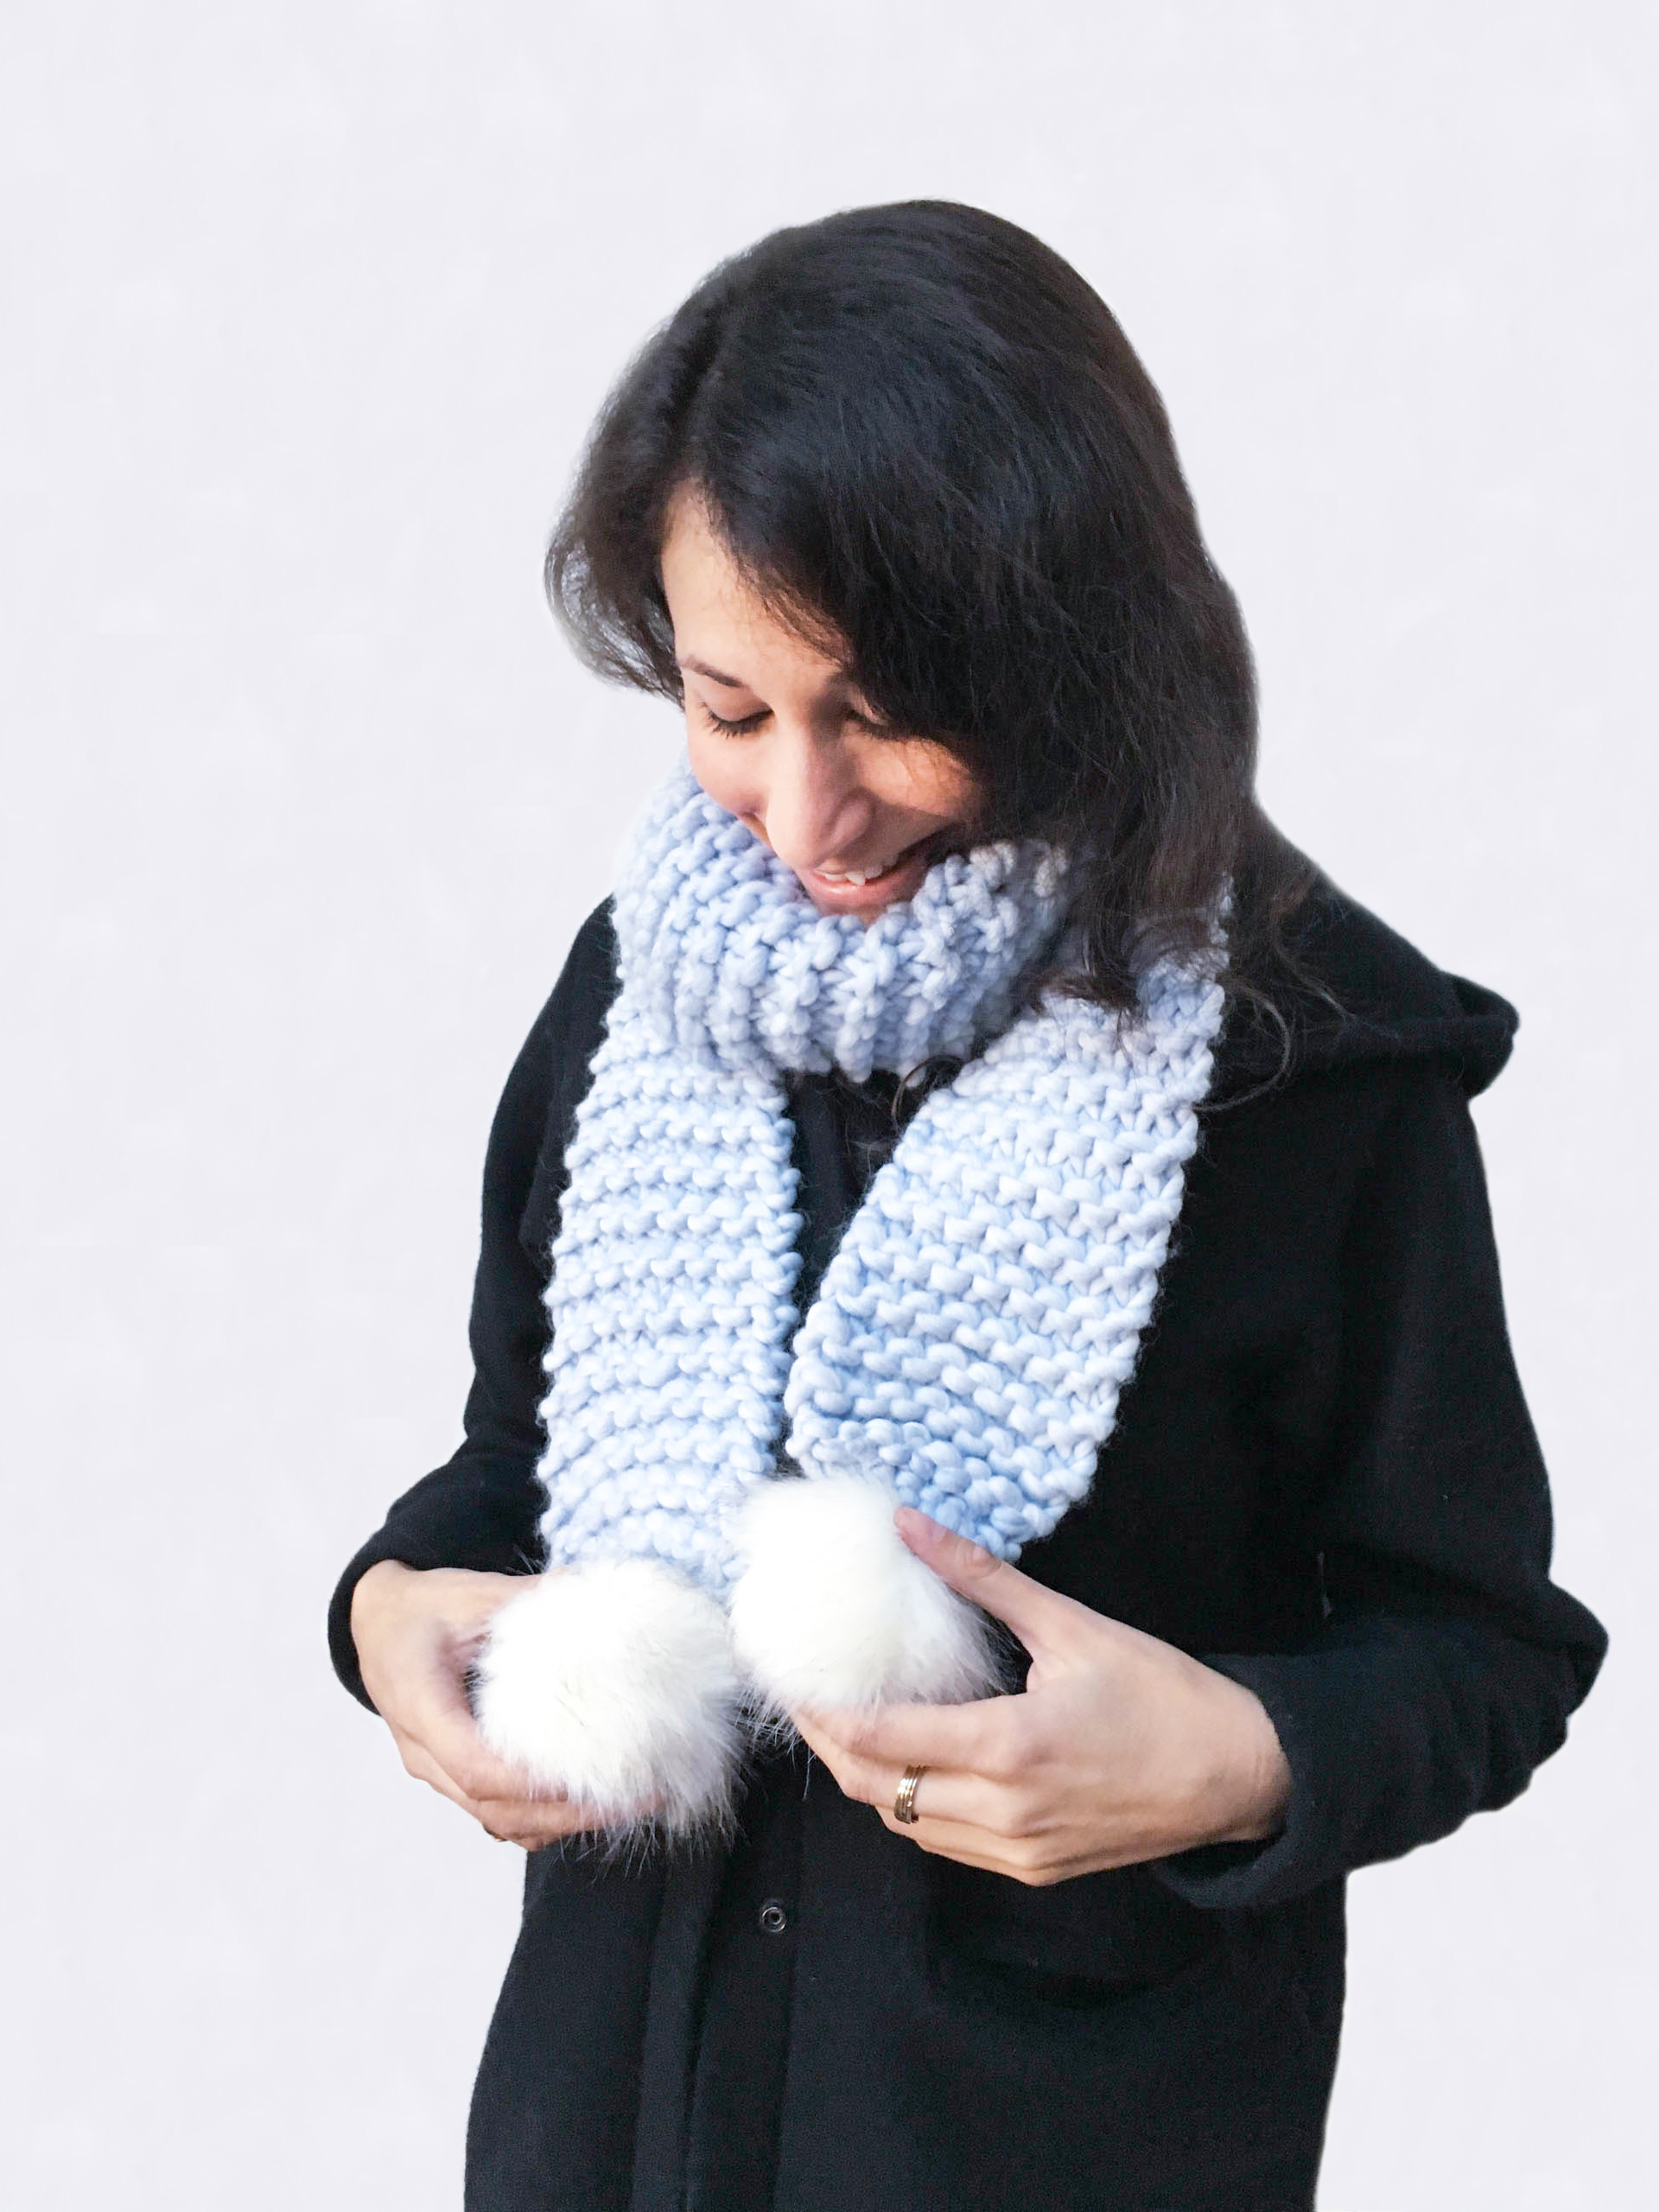 Handmade woolly scarves - Periwinkle scarf with white furry pom poms. Click to customise.